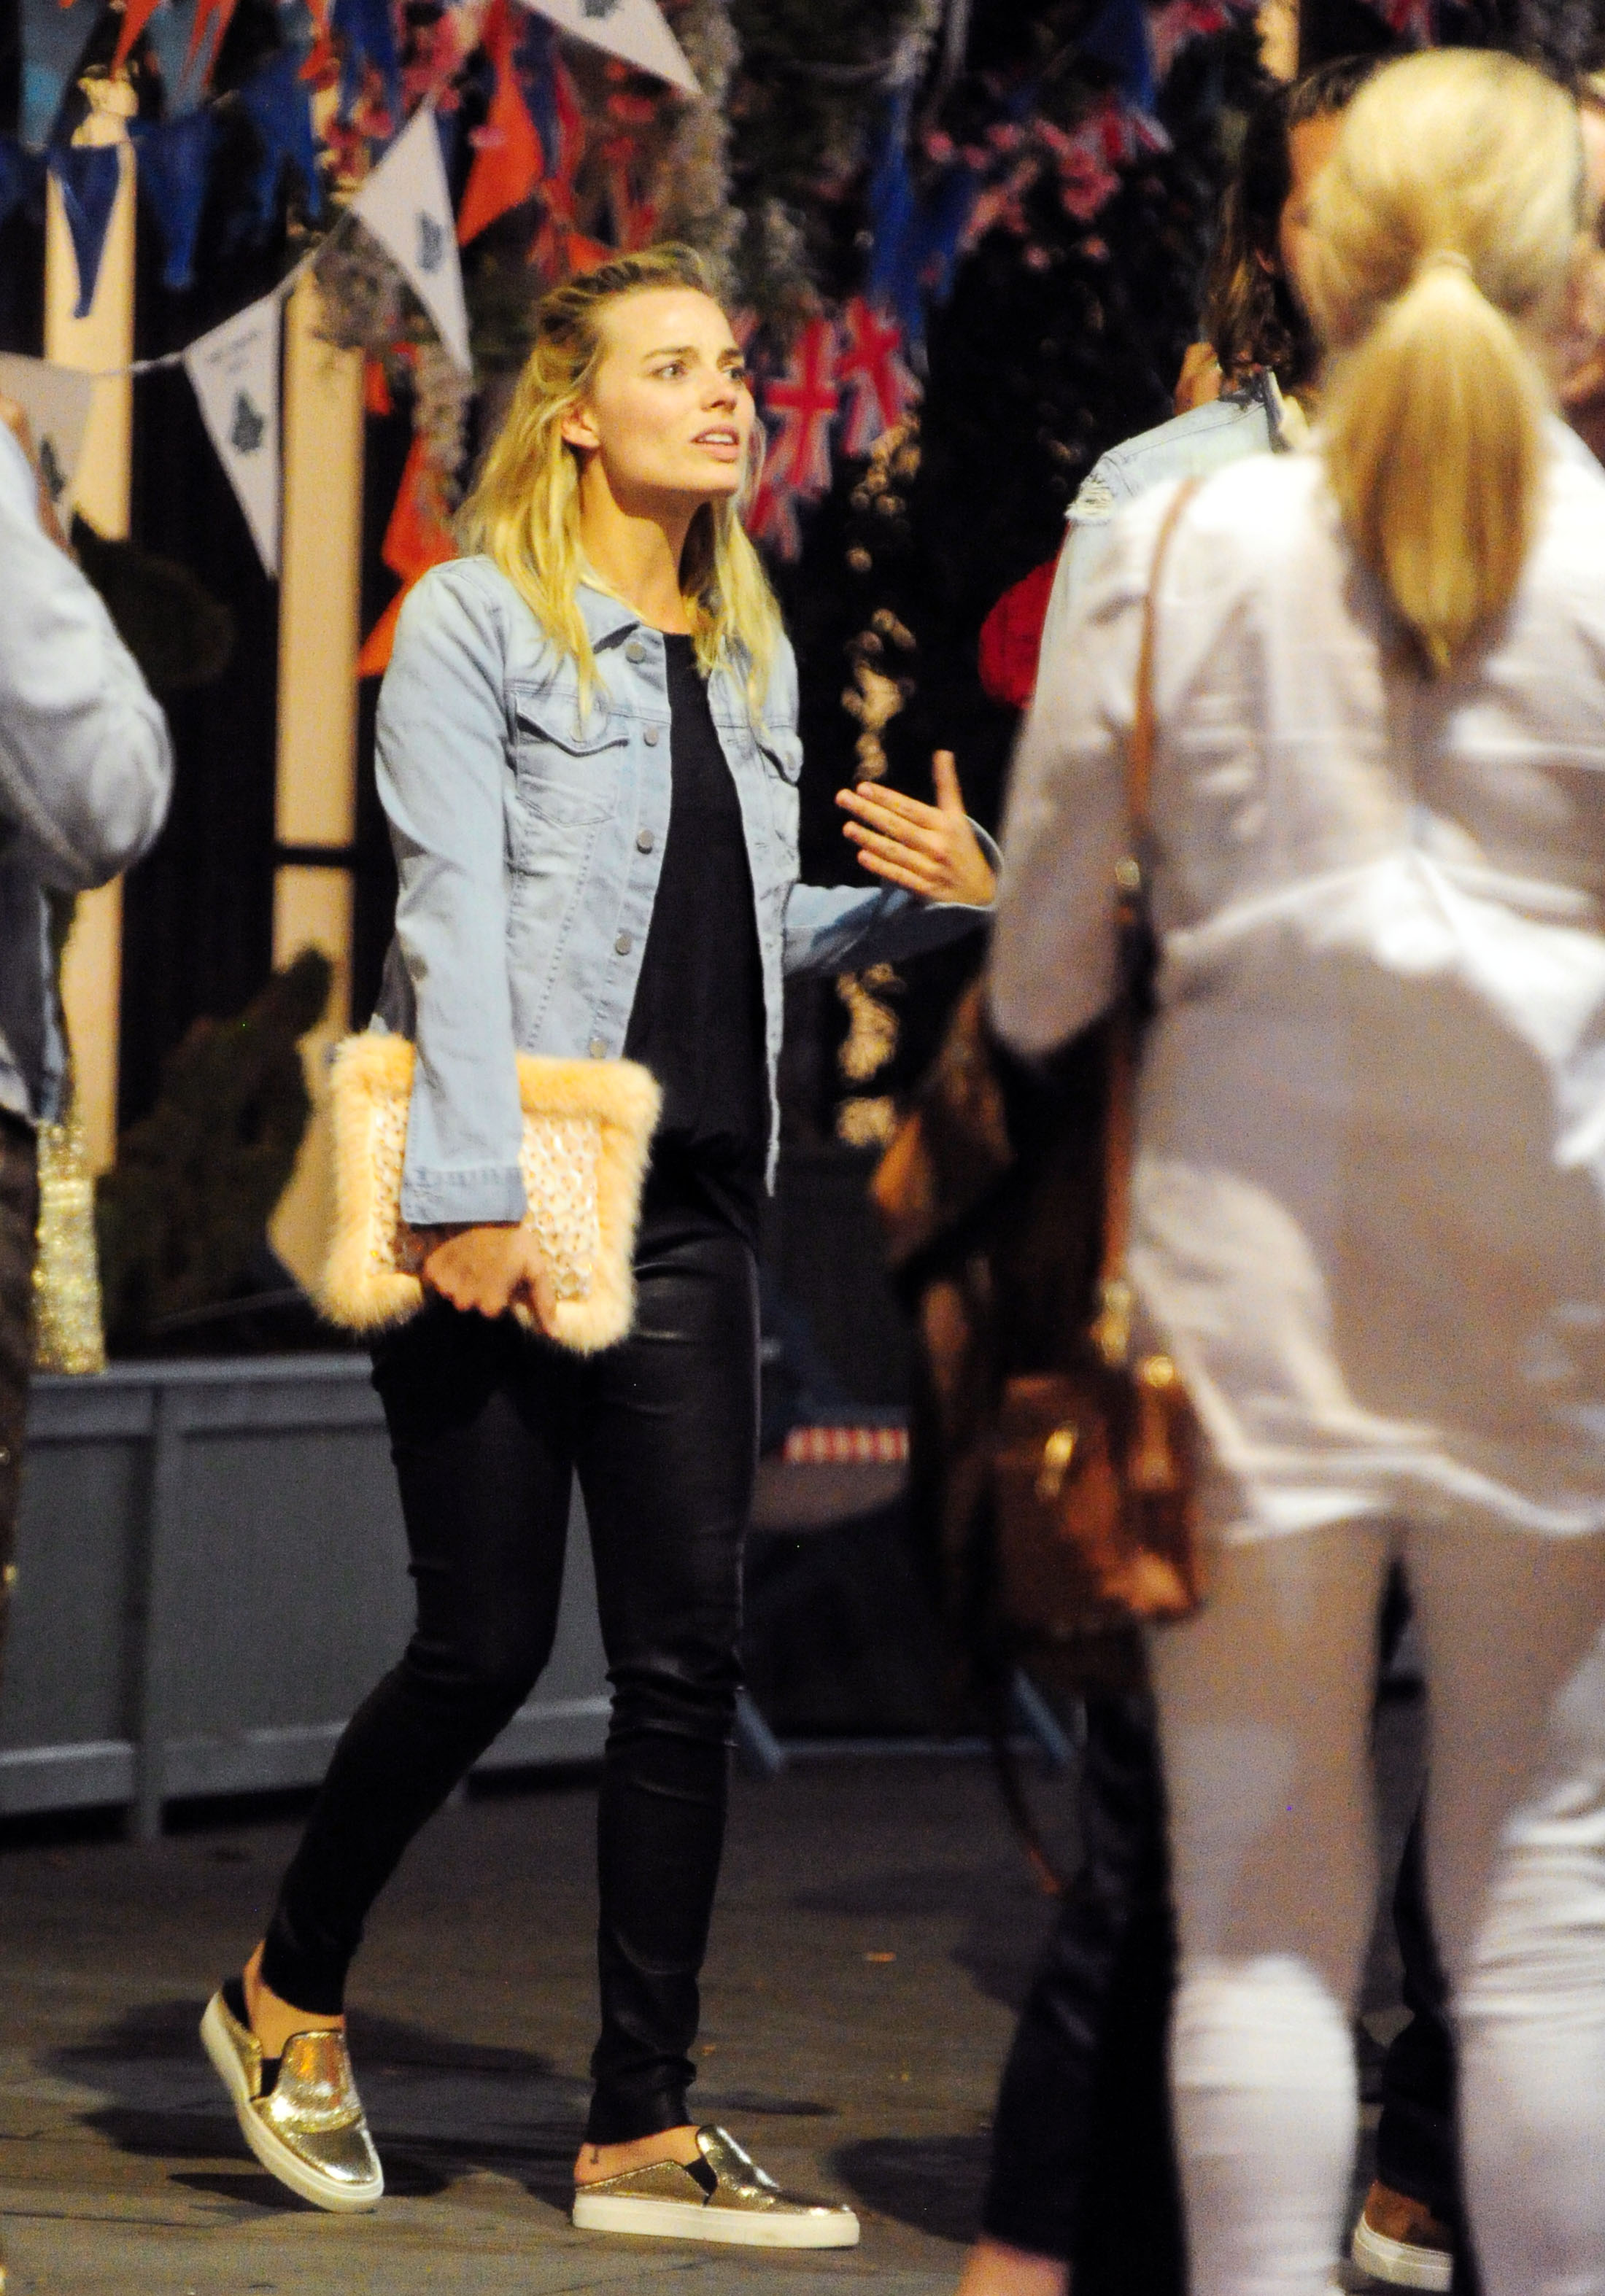 Margot Robbie out in London